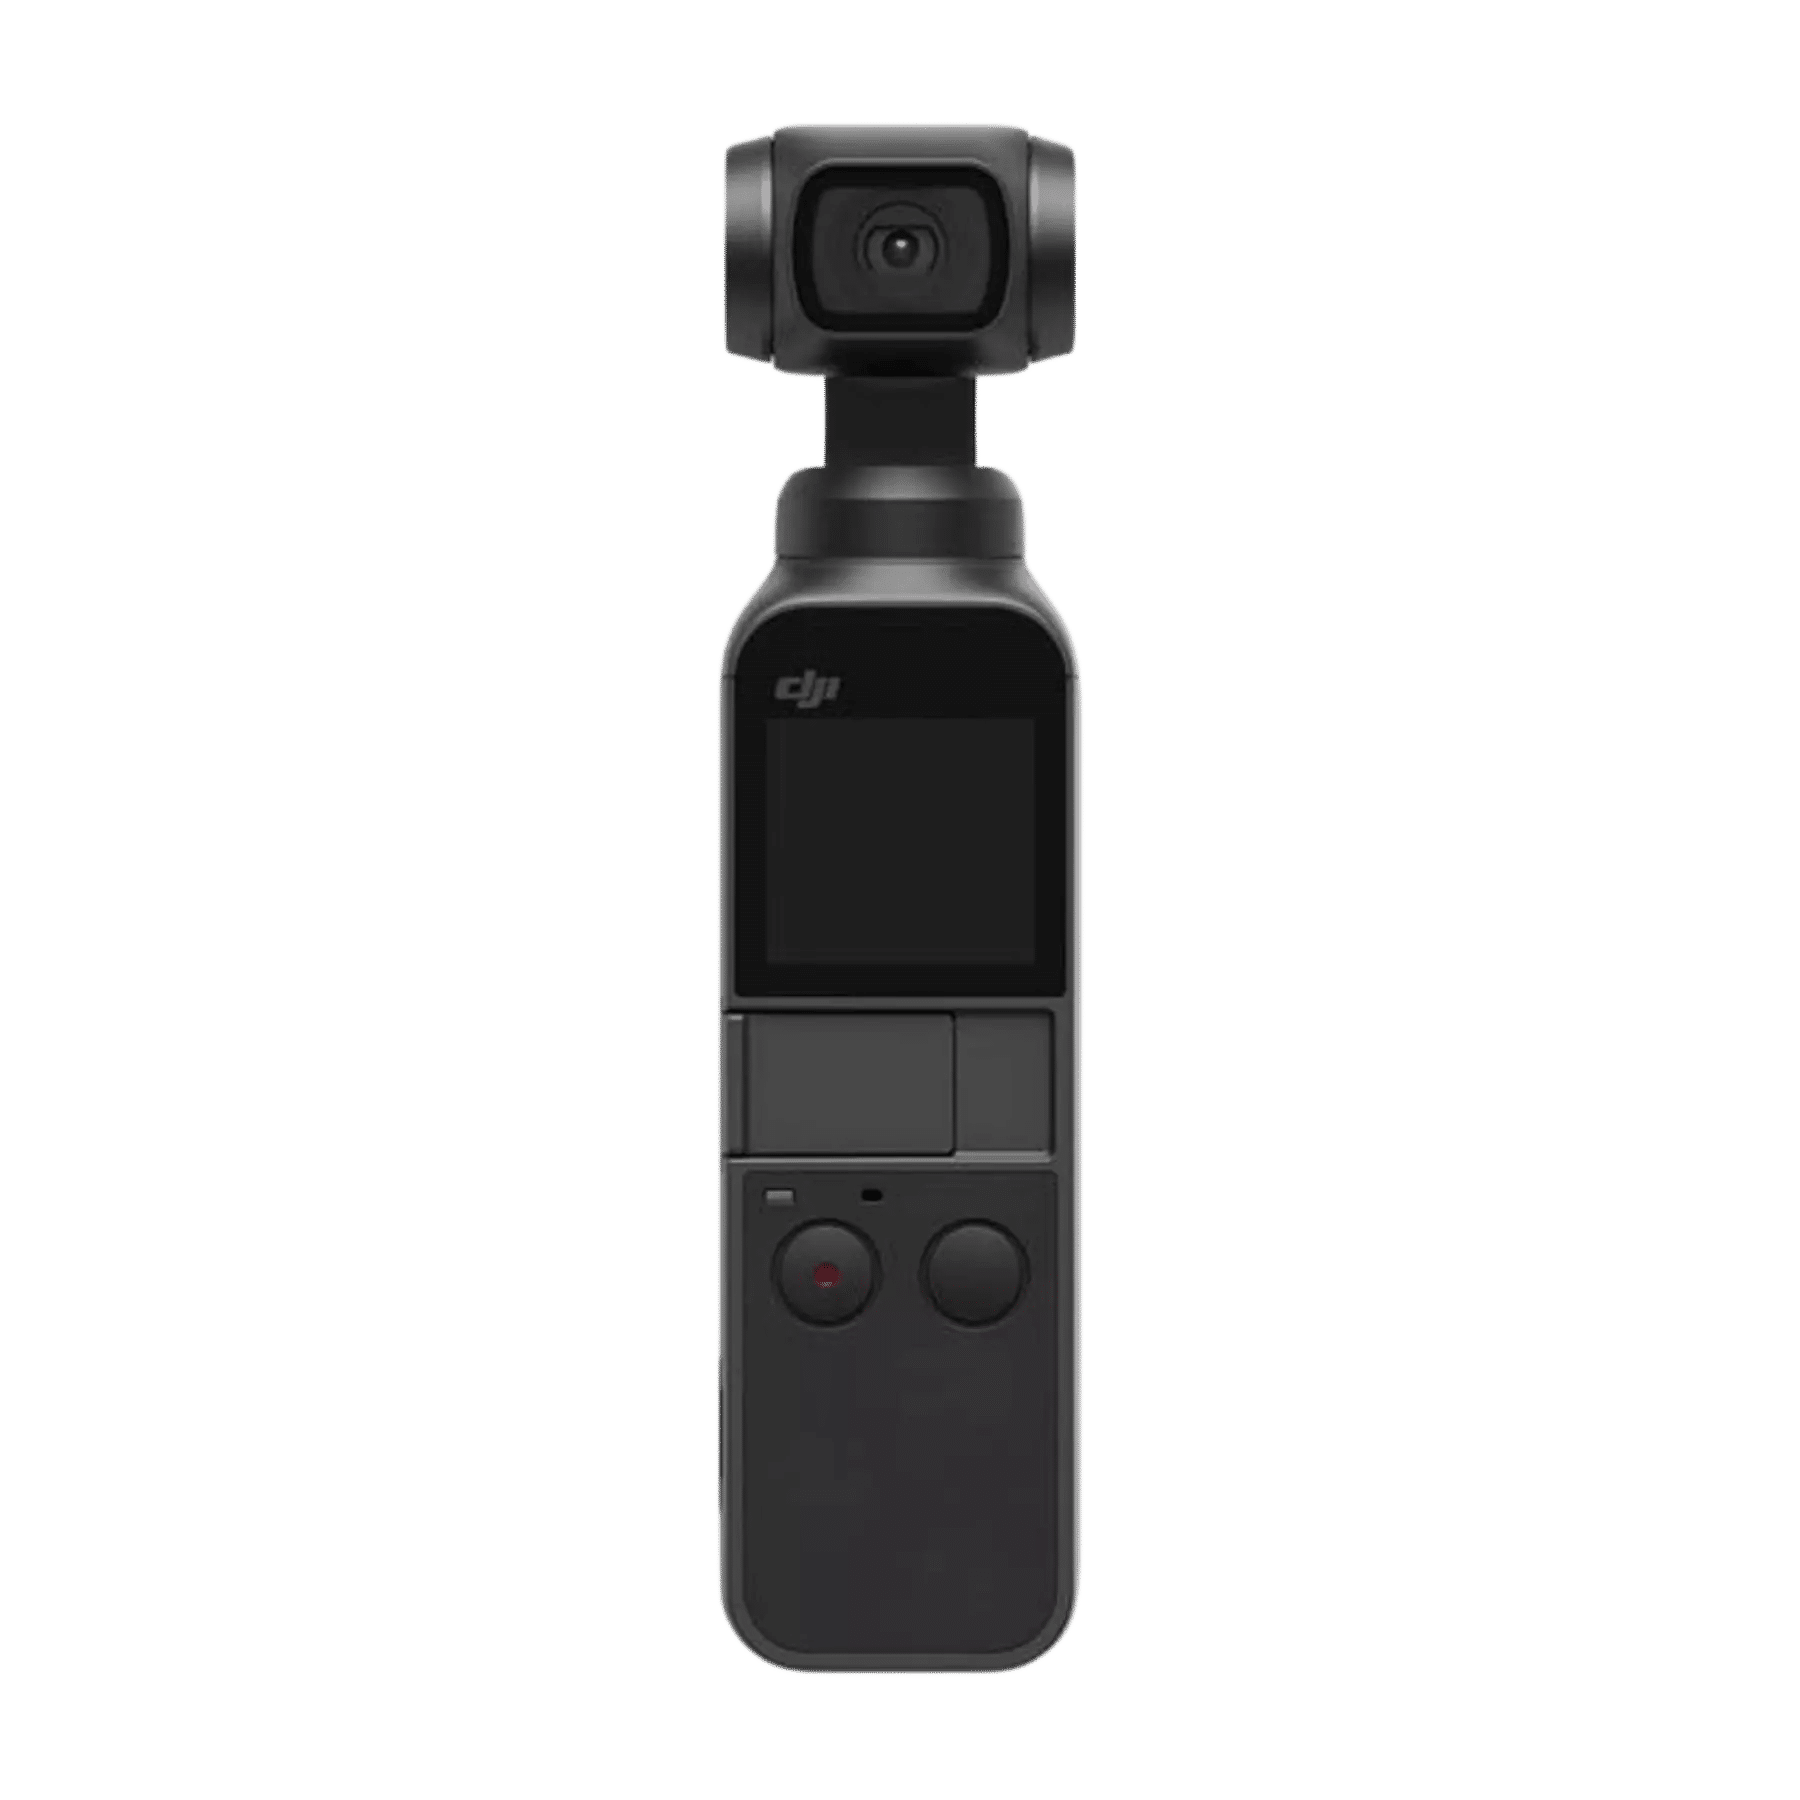 These are product images of DJI Pocket on rent by SharePal in Bangalore.